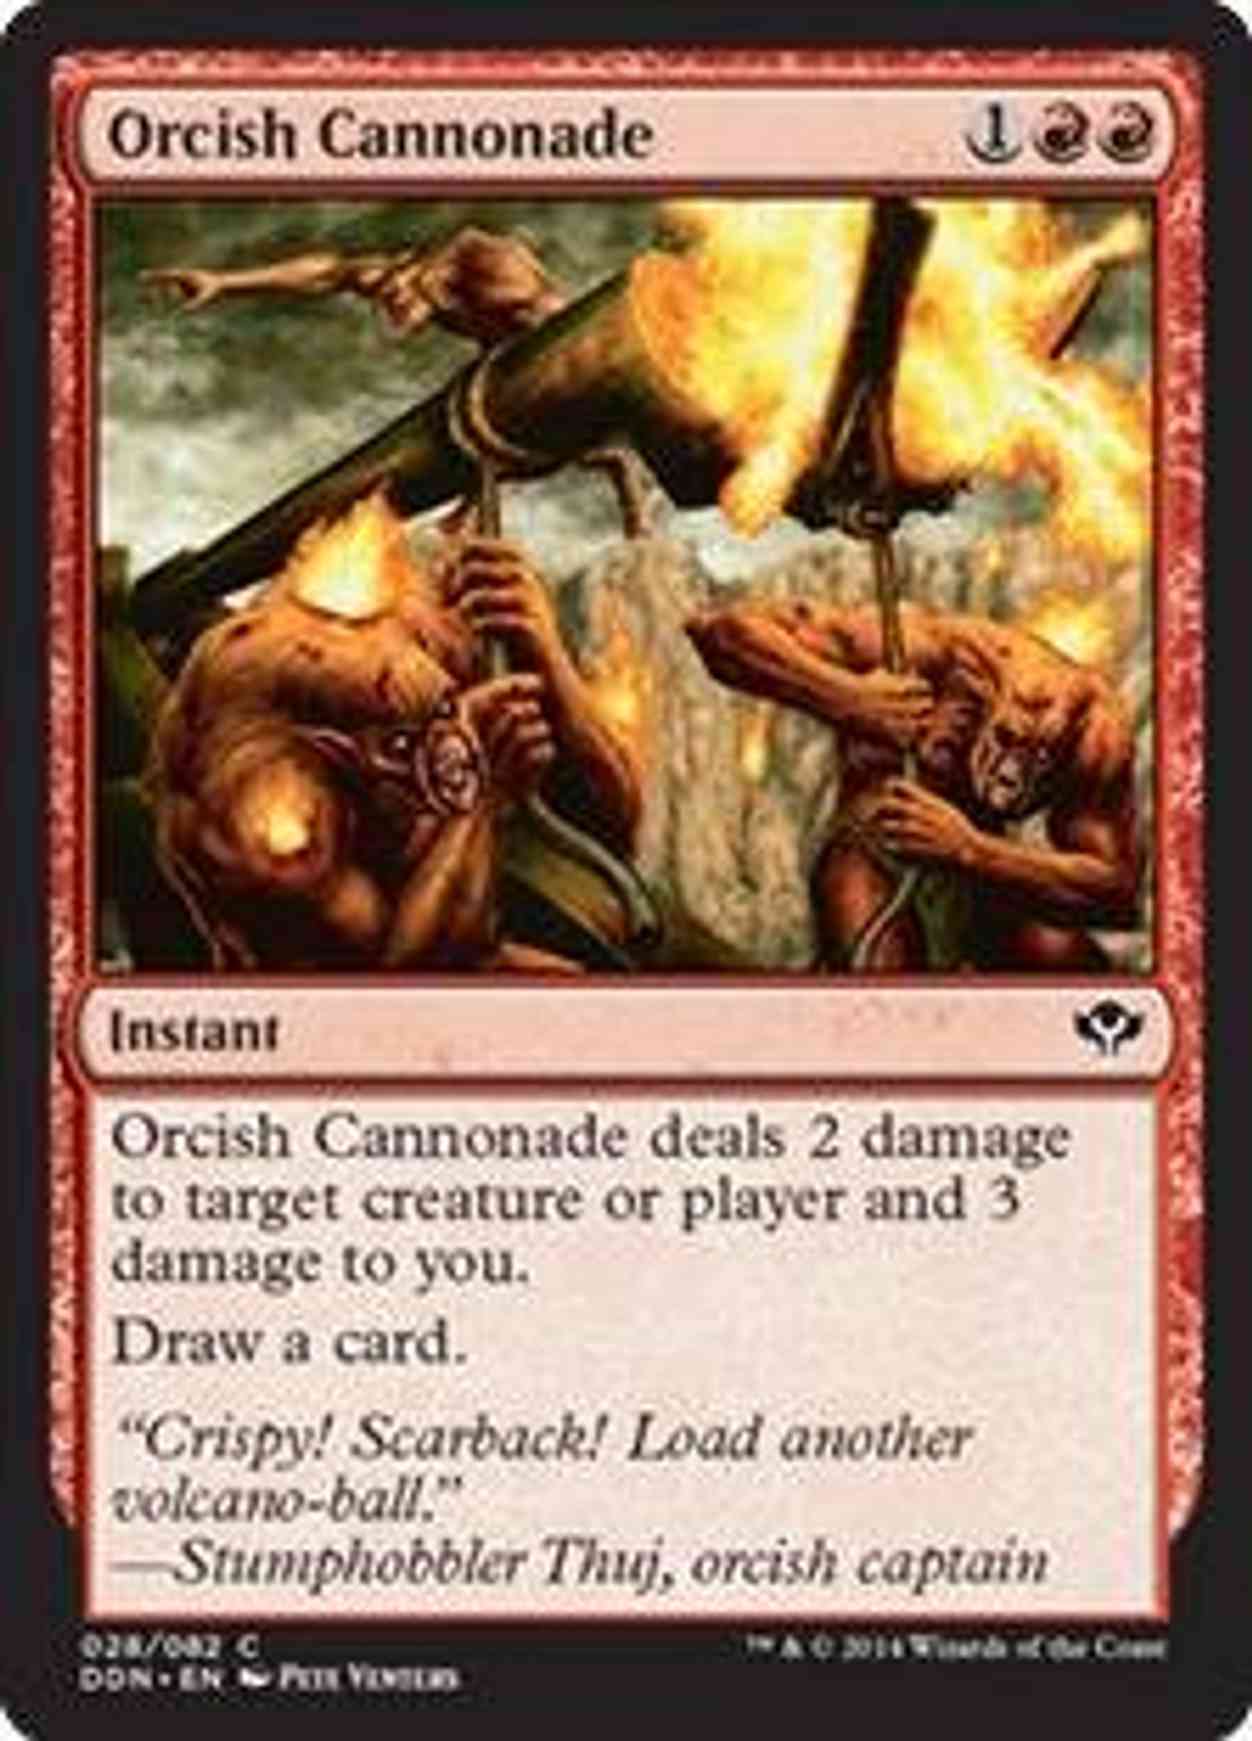 Orcish Cannonade magic card front